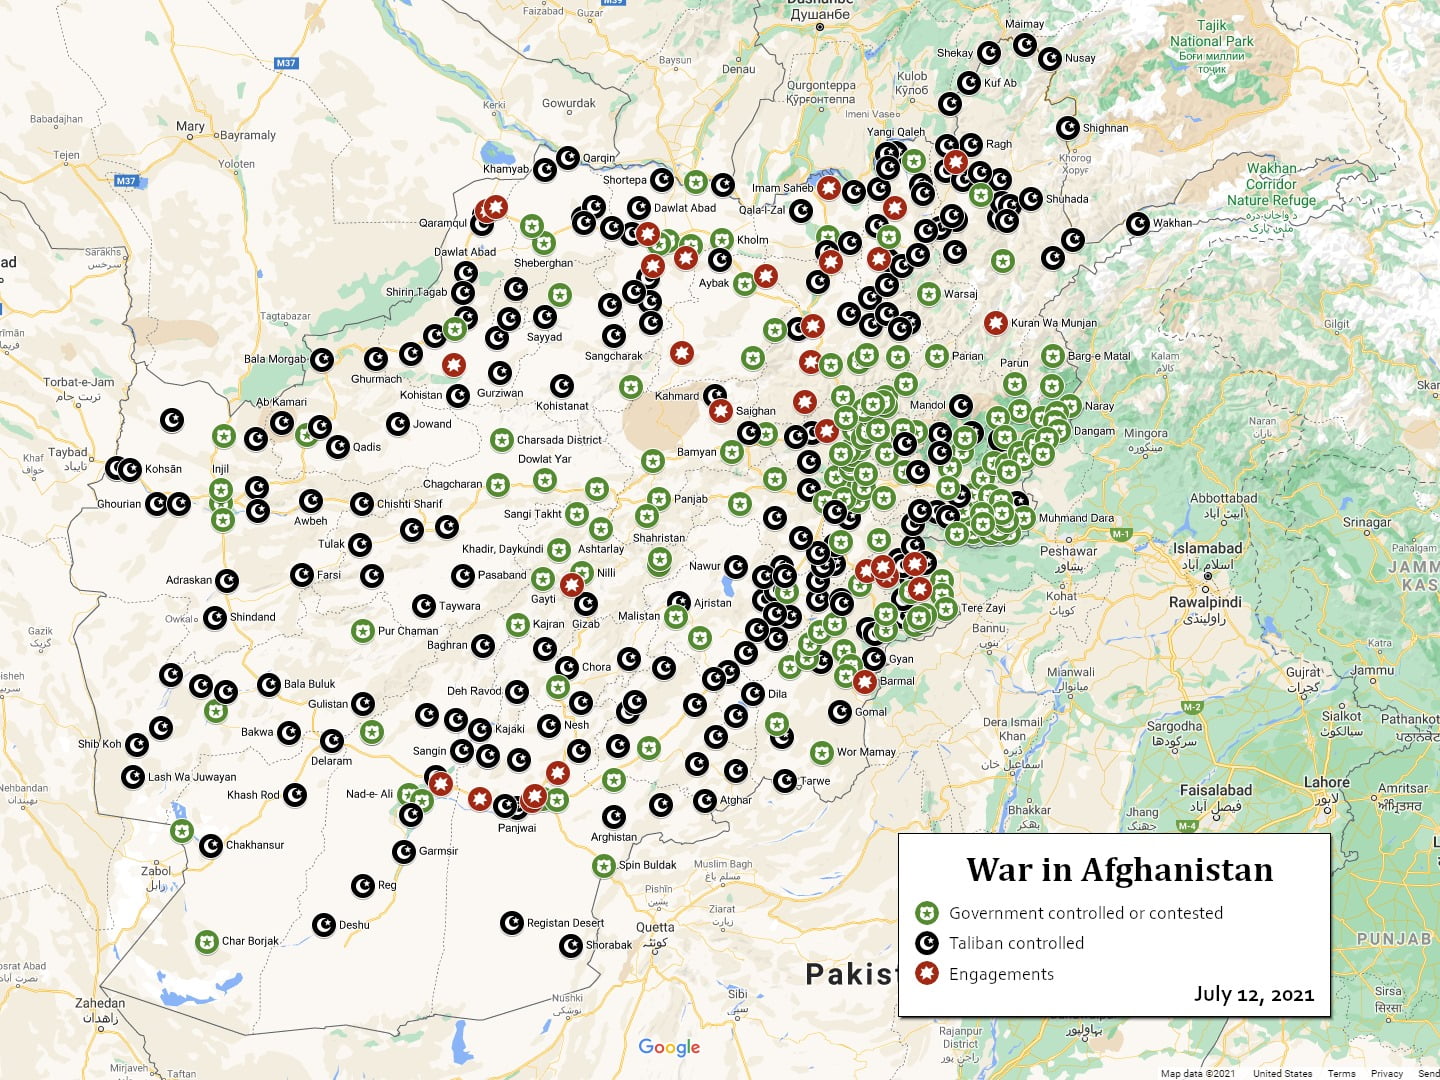 War in Afghanistan map for July 12, 2021